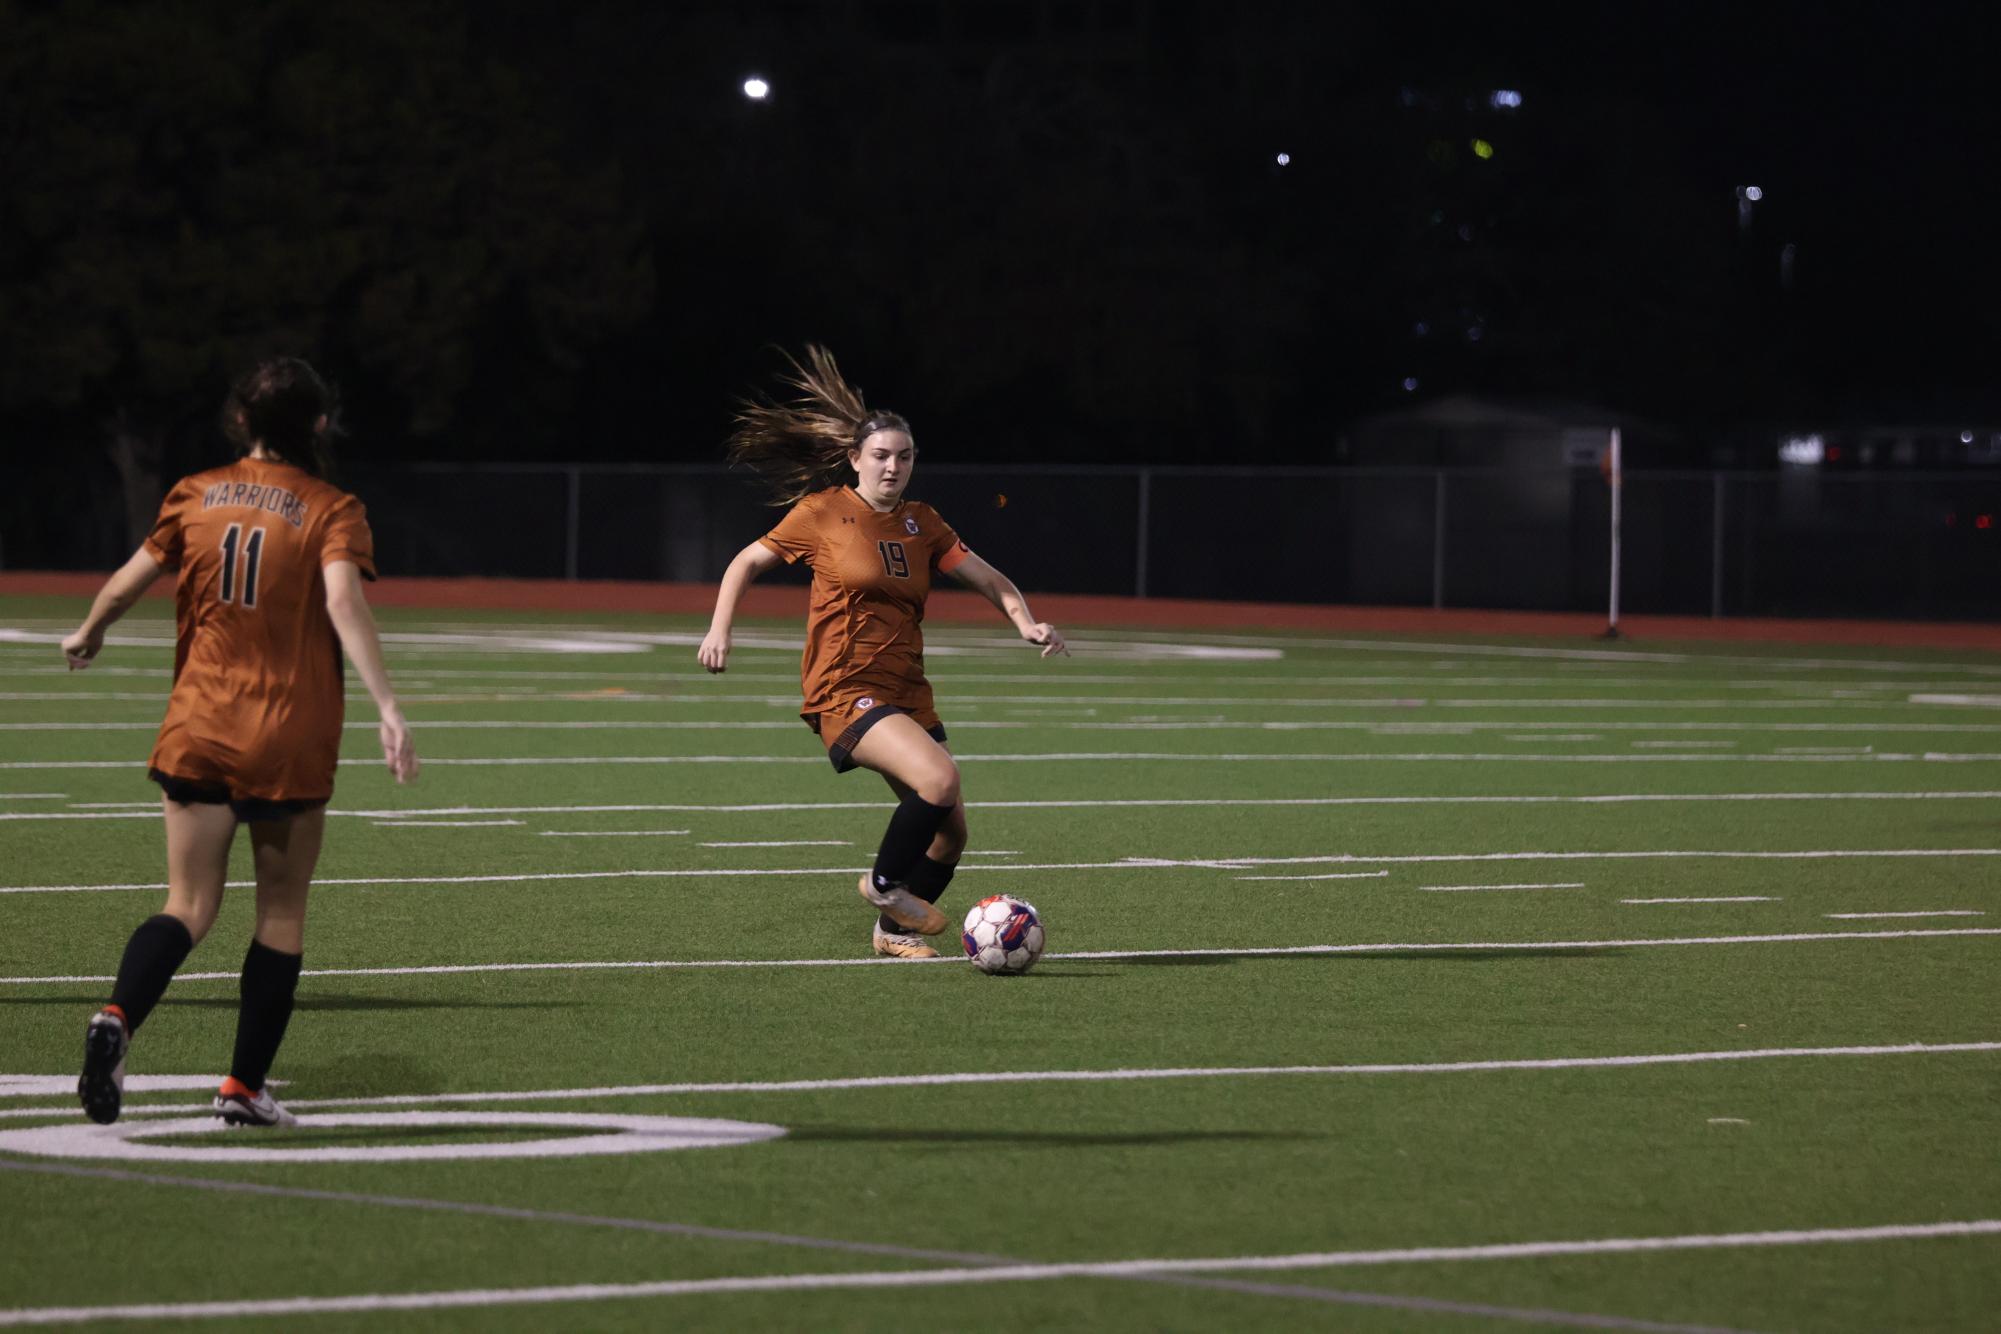 Varsity+Girls+Soccer+Beat+Stony+Point+4-1+in+Heated+District+Game